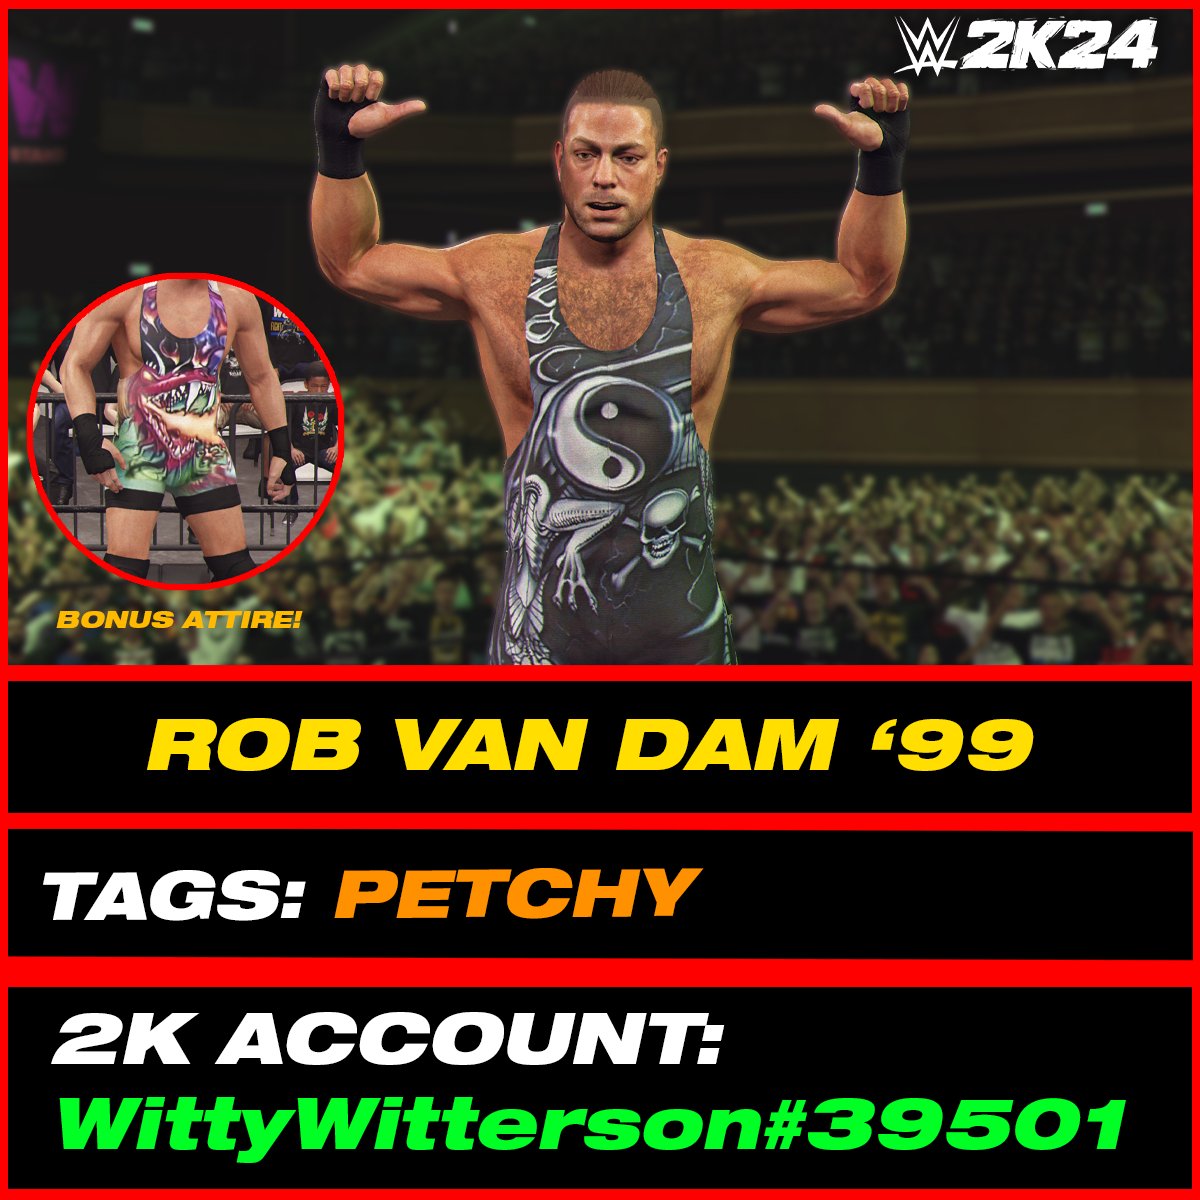 RVD '99 (In-Game Edit) is uploaded onto Community Creations #WWE2K24 •Hashtags are: PETCHY, WITTY226, RobVanDam Collab w/ @PETCHYcreations 2nd Attire by @GameVolt1 INCLUDES: • RVD Call Name • RVD Commentary • Added Body Hair & Face Texture • Automatic Alt Attire